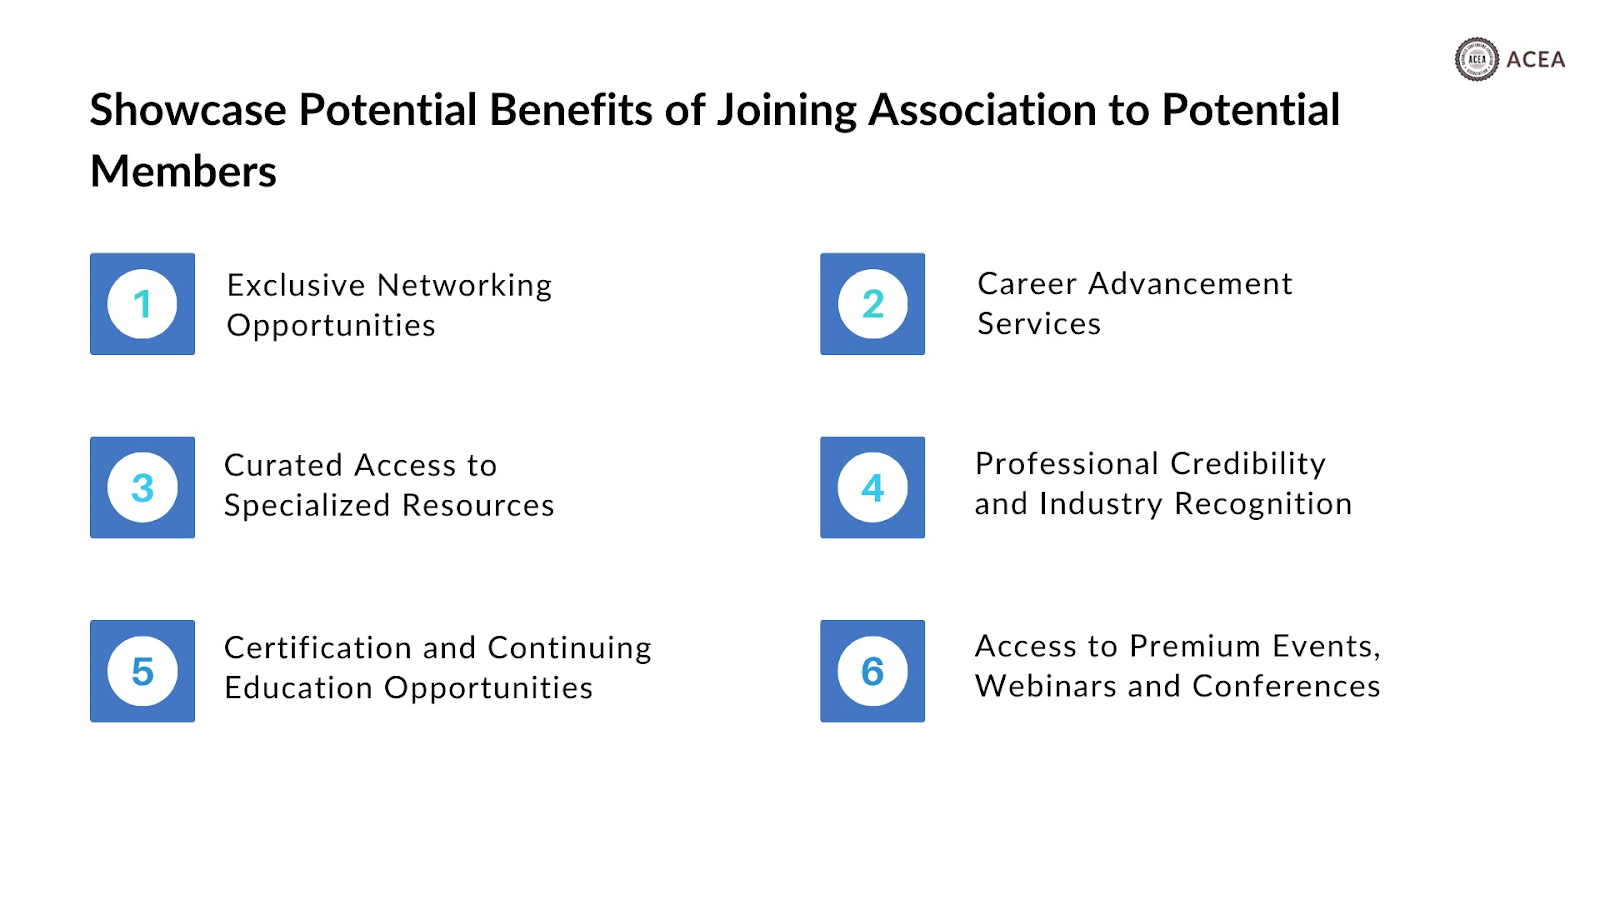 Benefits of joining associations to potential members